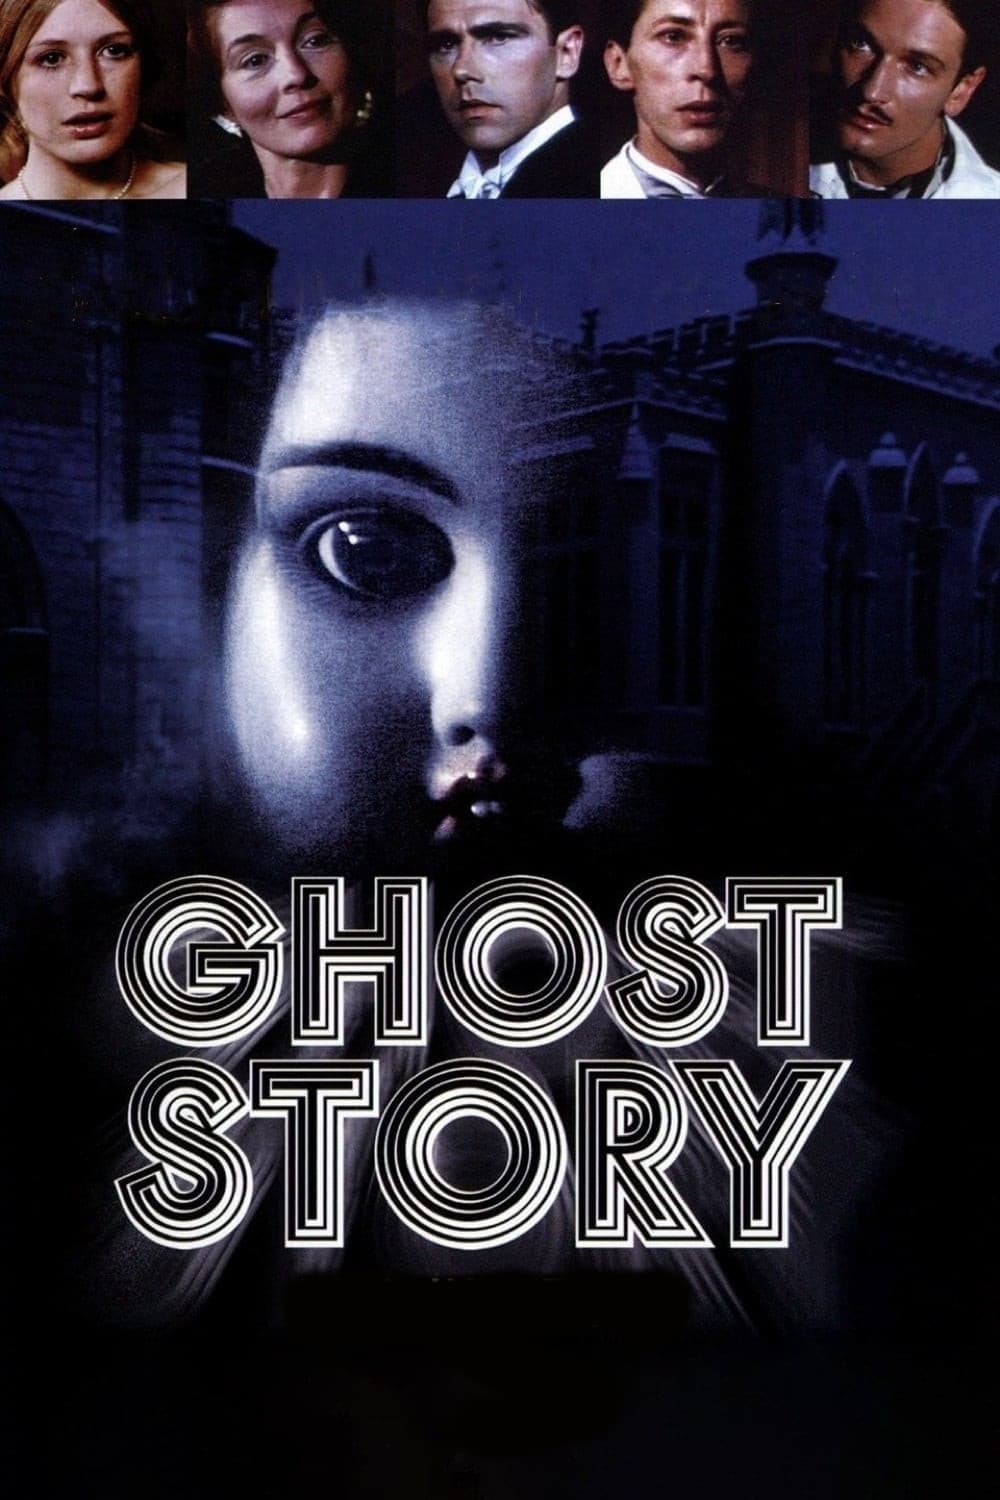 Ghost Story (1974)